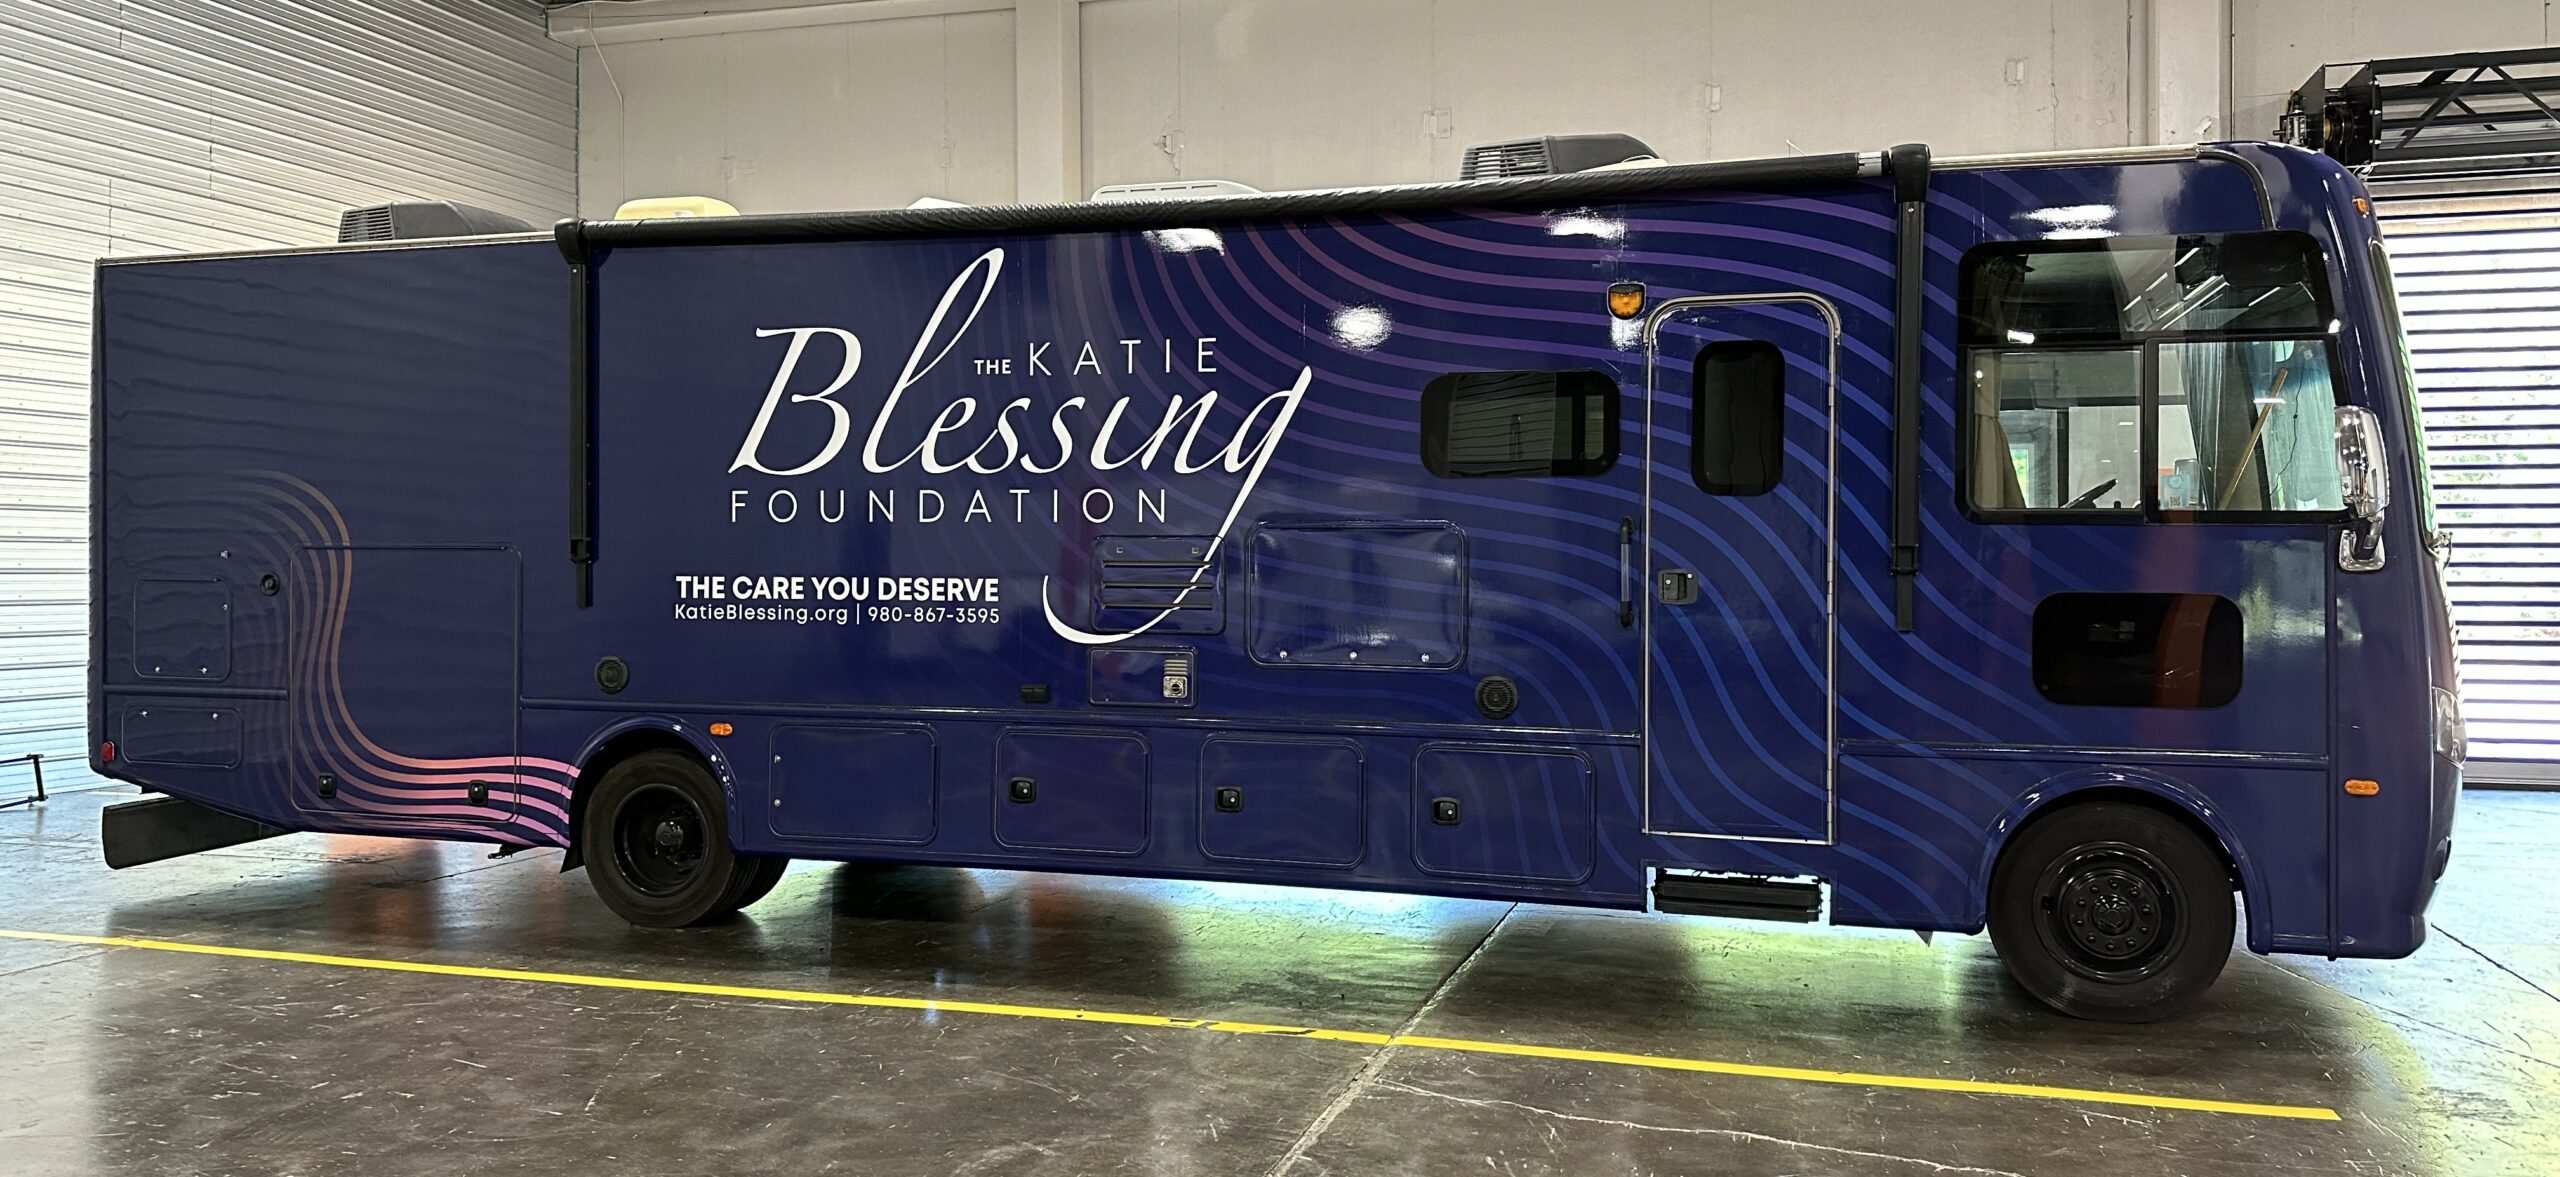 The katie blessing advertisement full bus wrap in Charlotte, NC